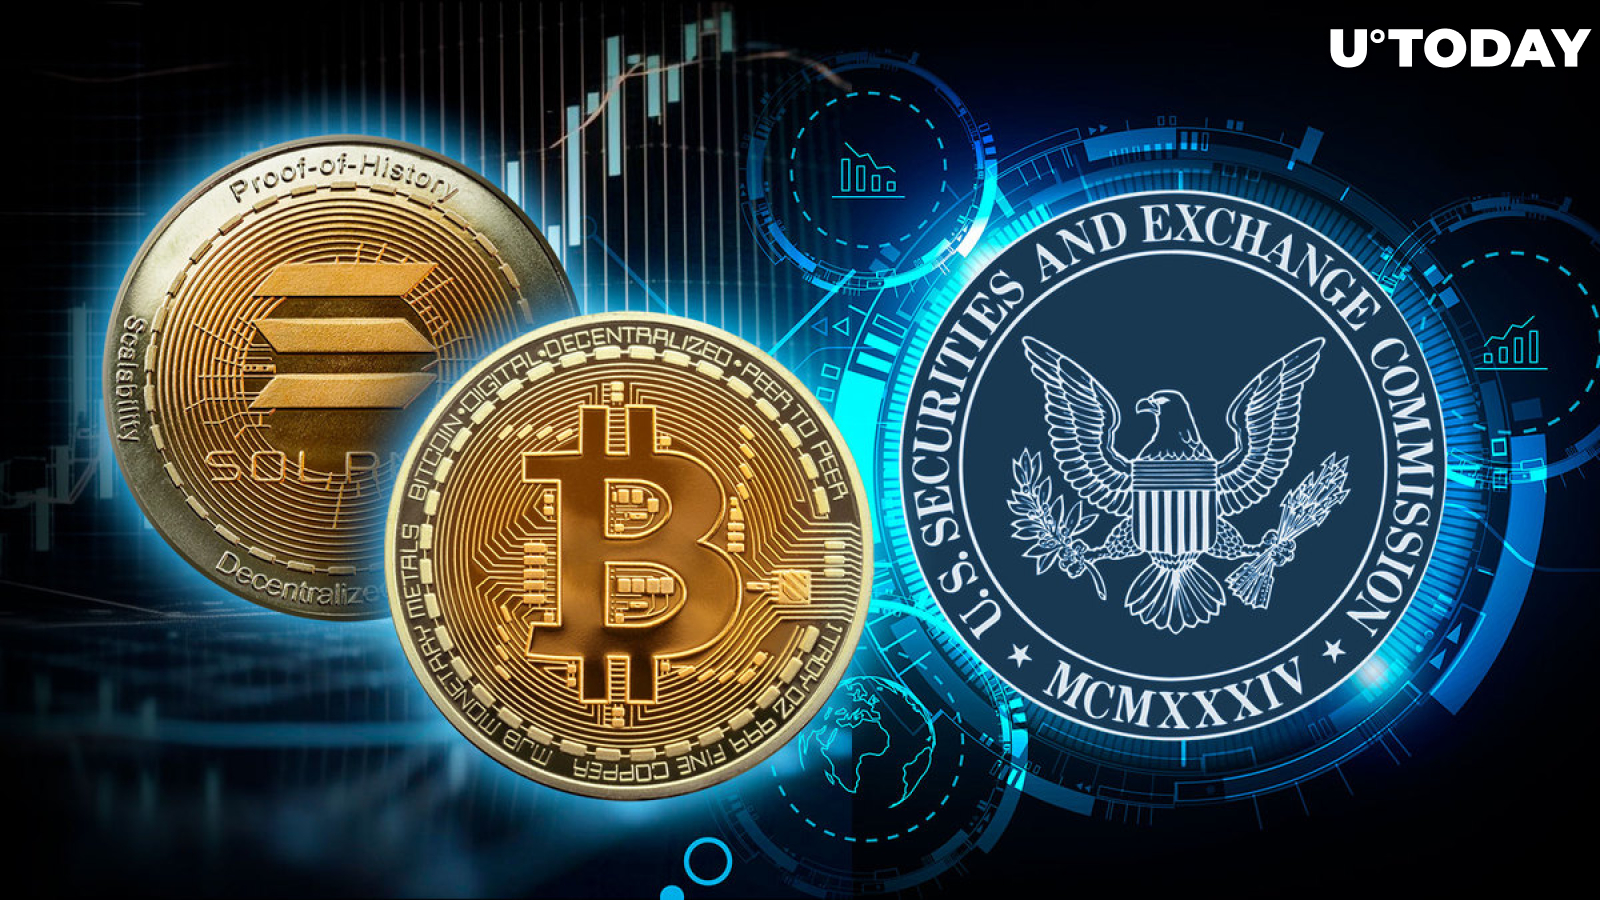 Solana, Bitcoin SV Biggest Gainers From SEC Bitcoin ETF-Fueled Pump